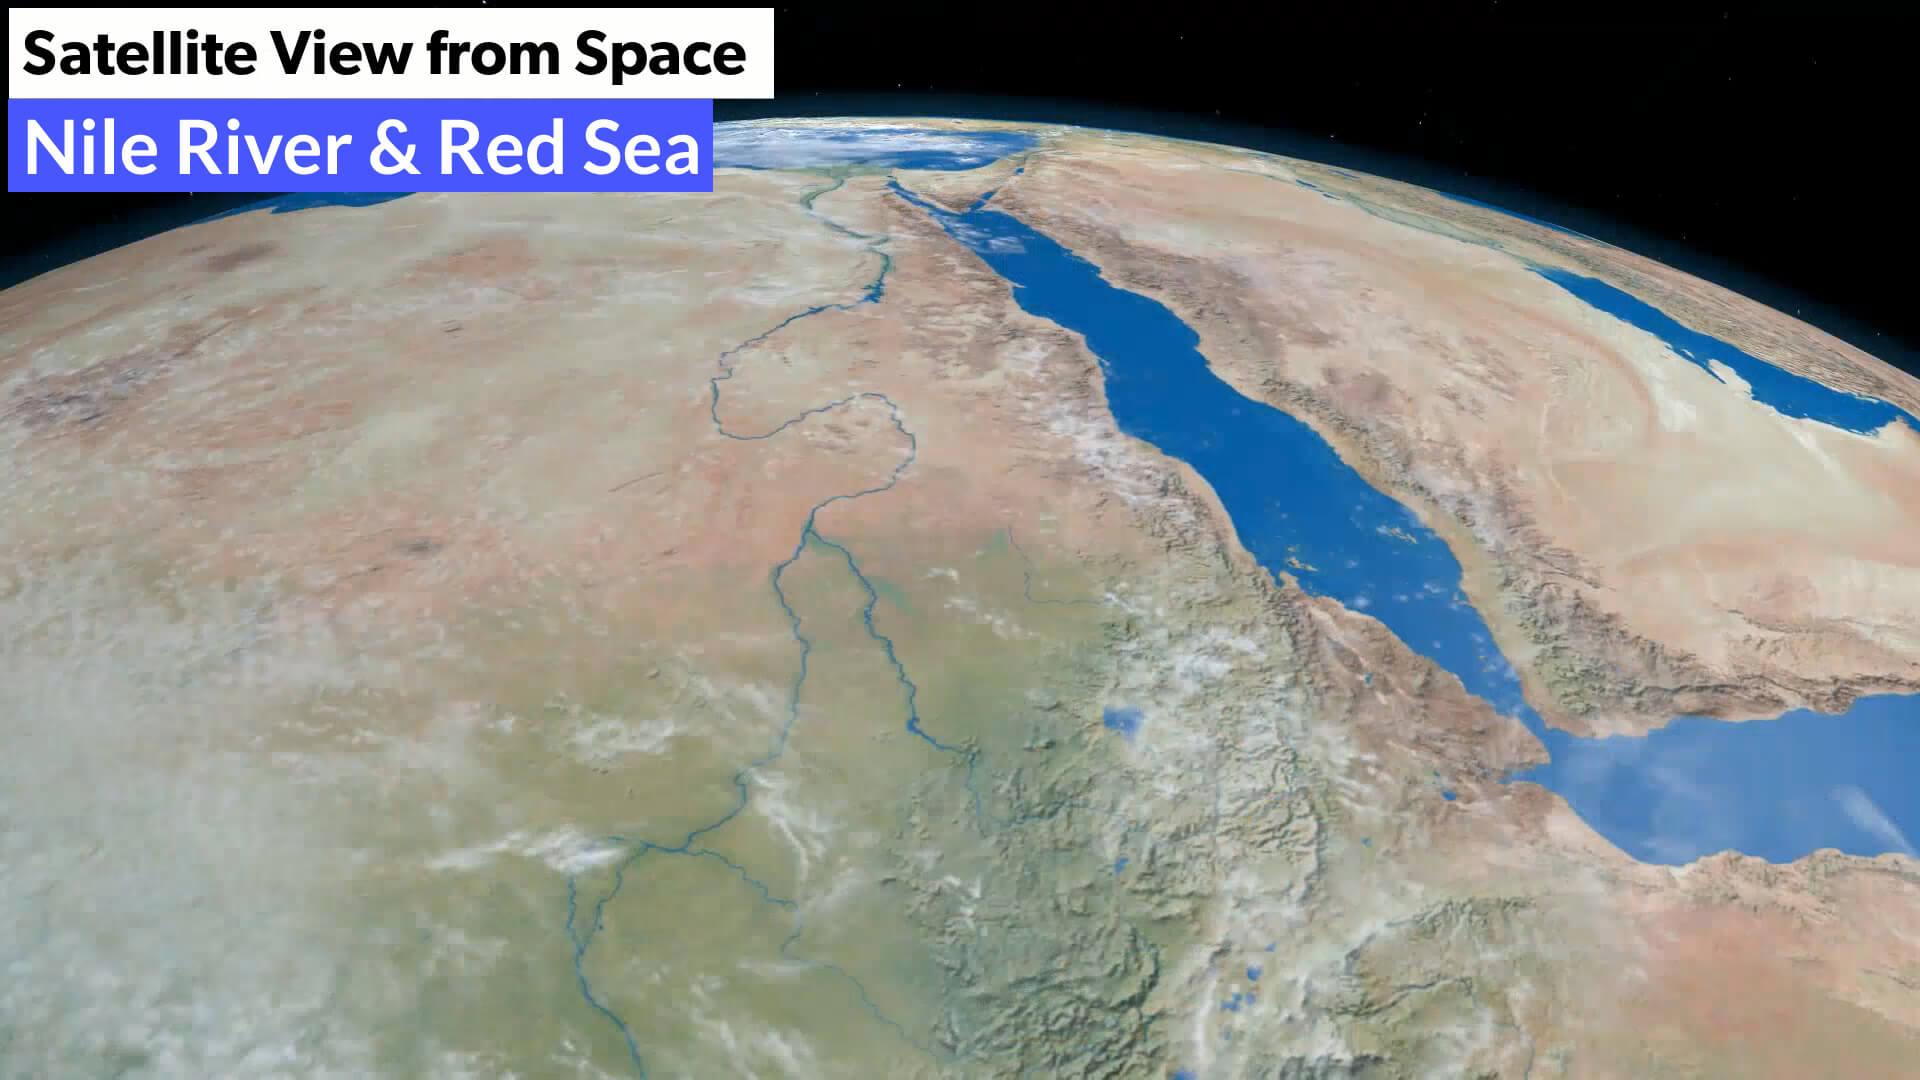 Nile River and Red Sea Satellite Image